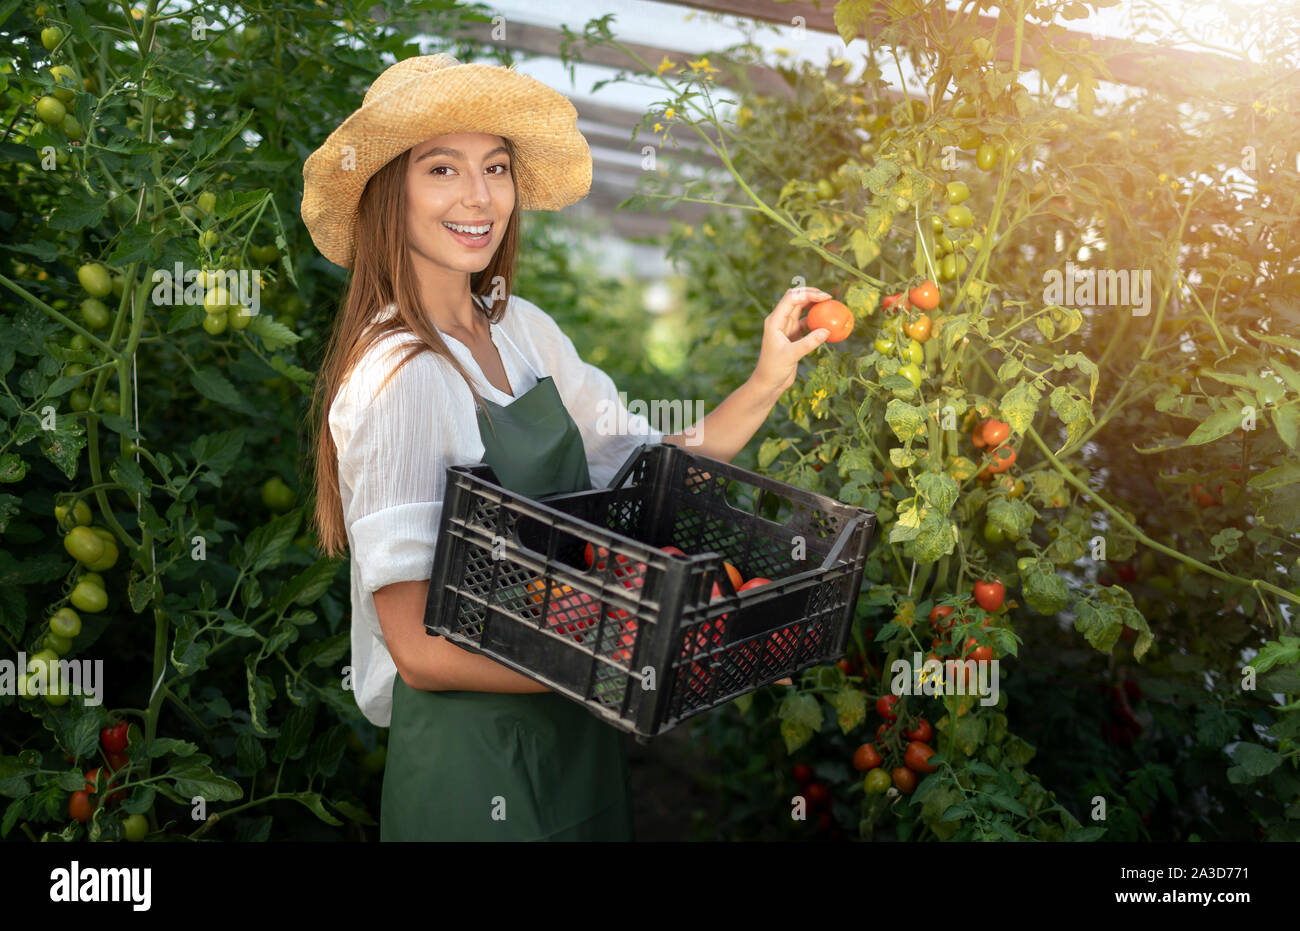 Portrait of smiling villager girl harvesting tomatoes in a hothouse Stock Photo